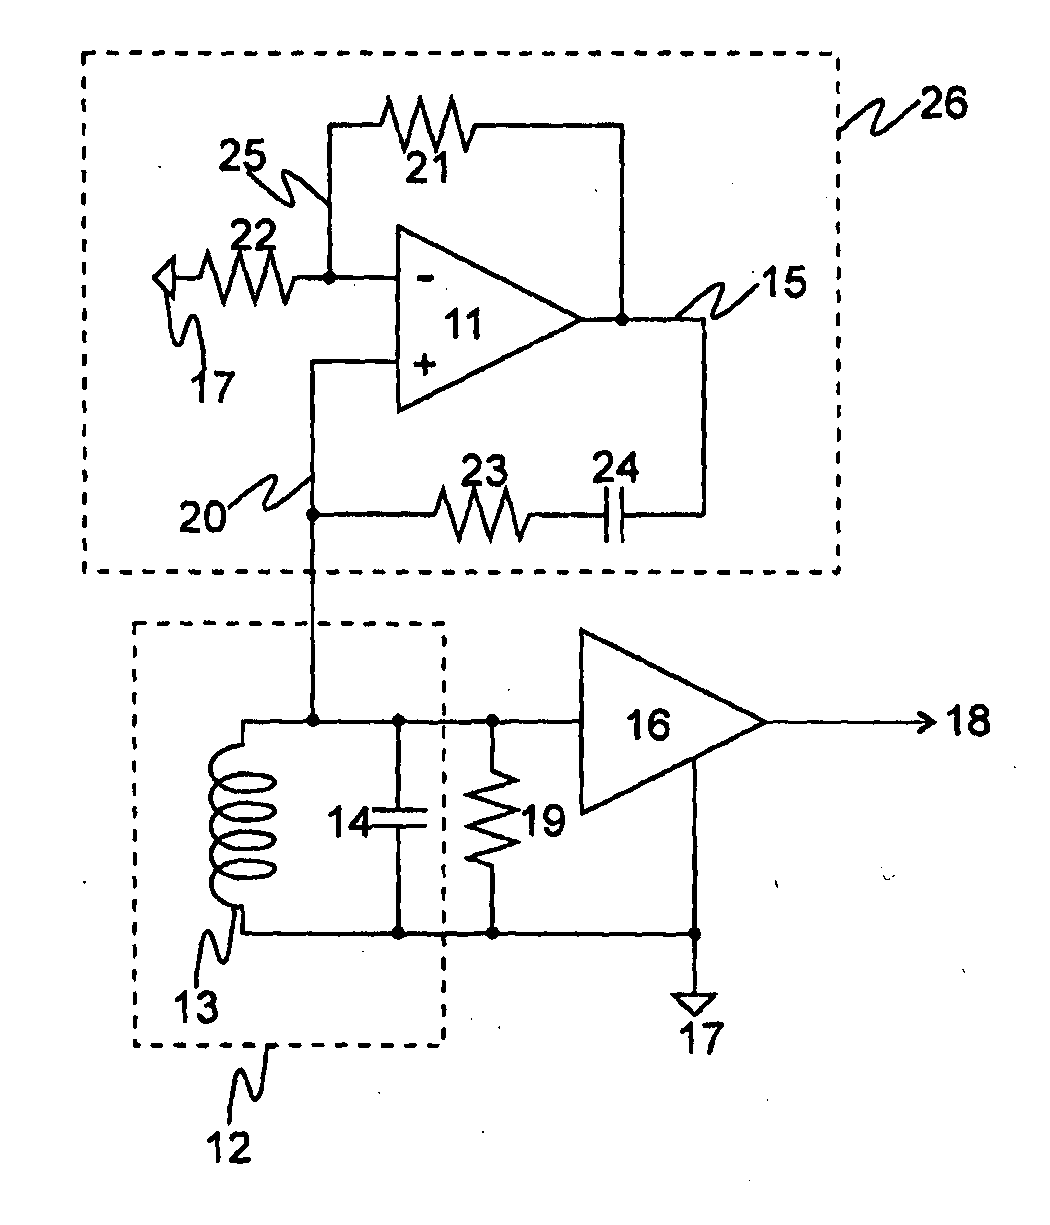 Method for Detecting Fast Time Constant Targets Using a Metal Detector